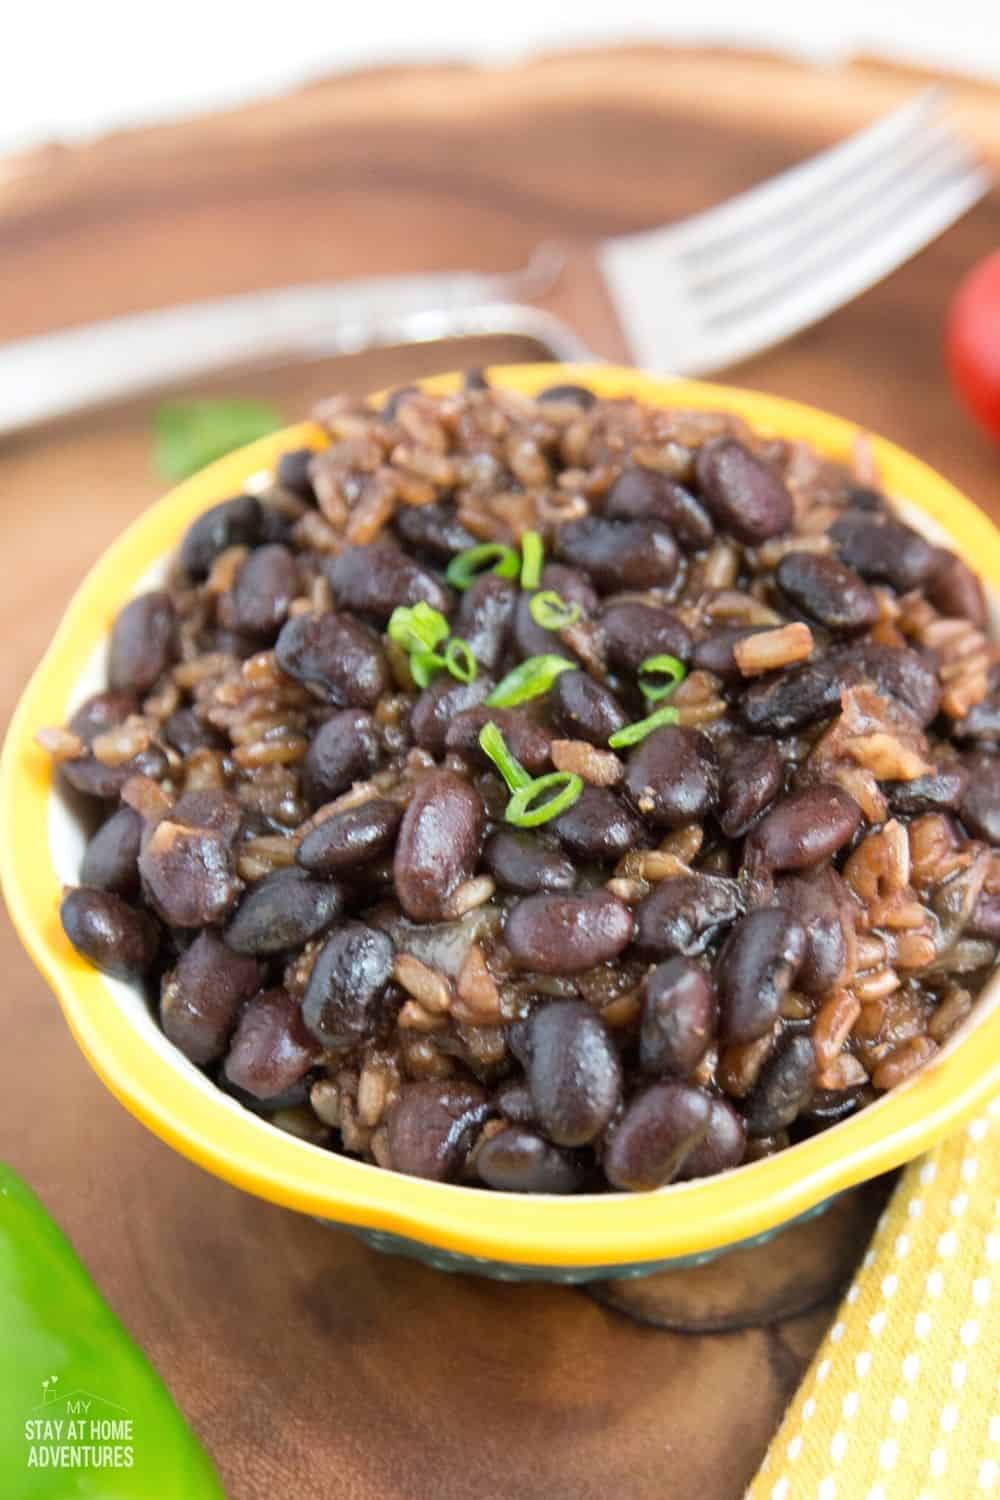 Looking for a meatless or vegan-friendly dinner? Try this Instant Pot Black Beans and Brown Rice Recipe for tonight. Full of flavor and easy to make. #meatless #Instantpot #brownrice #blackbeanrecipe #nomeatrecipe via @mystayathome